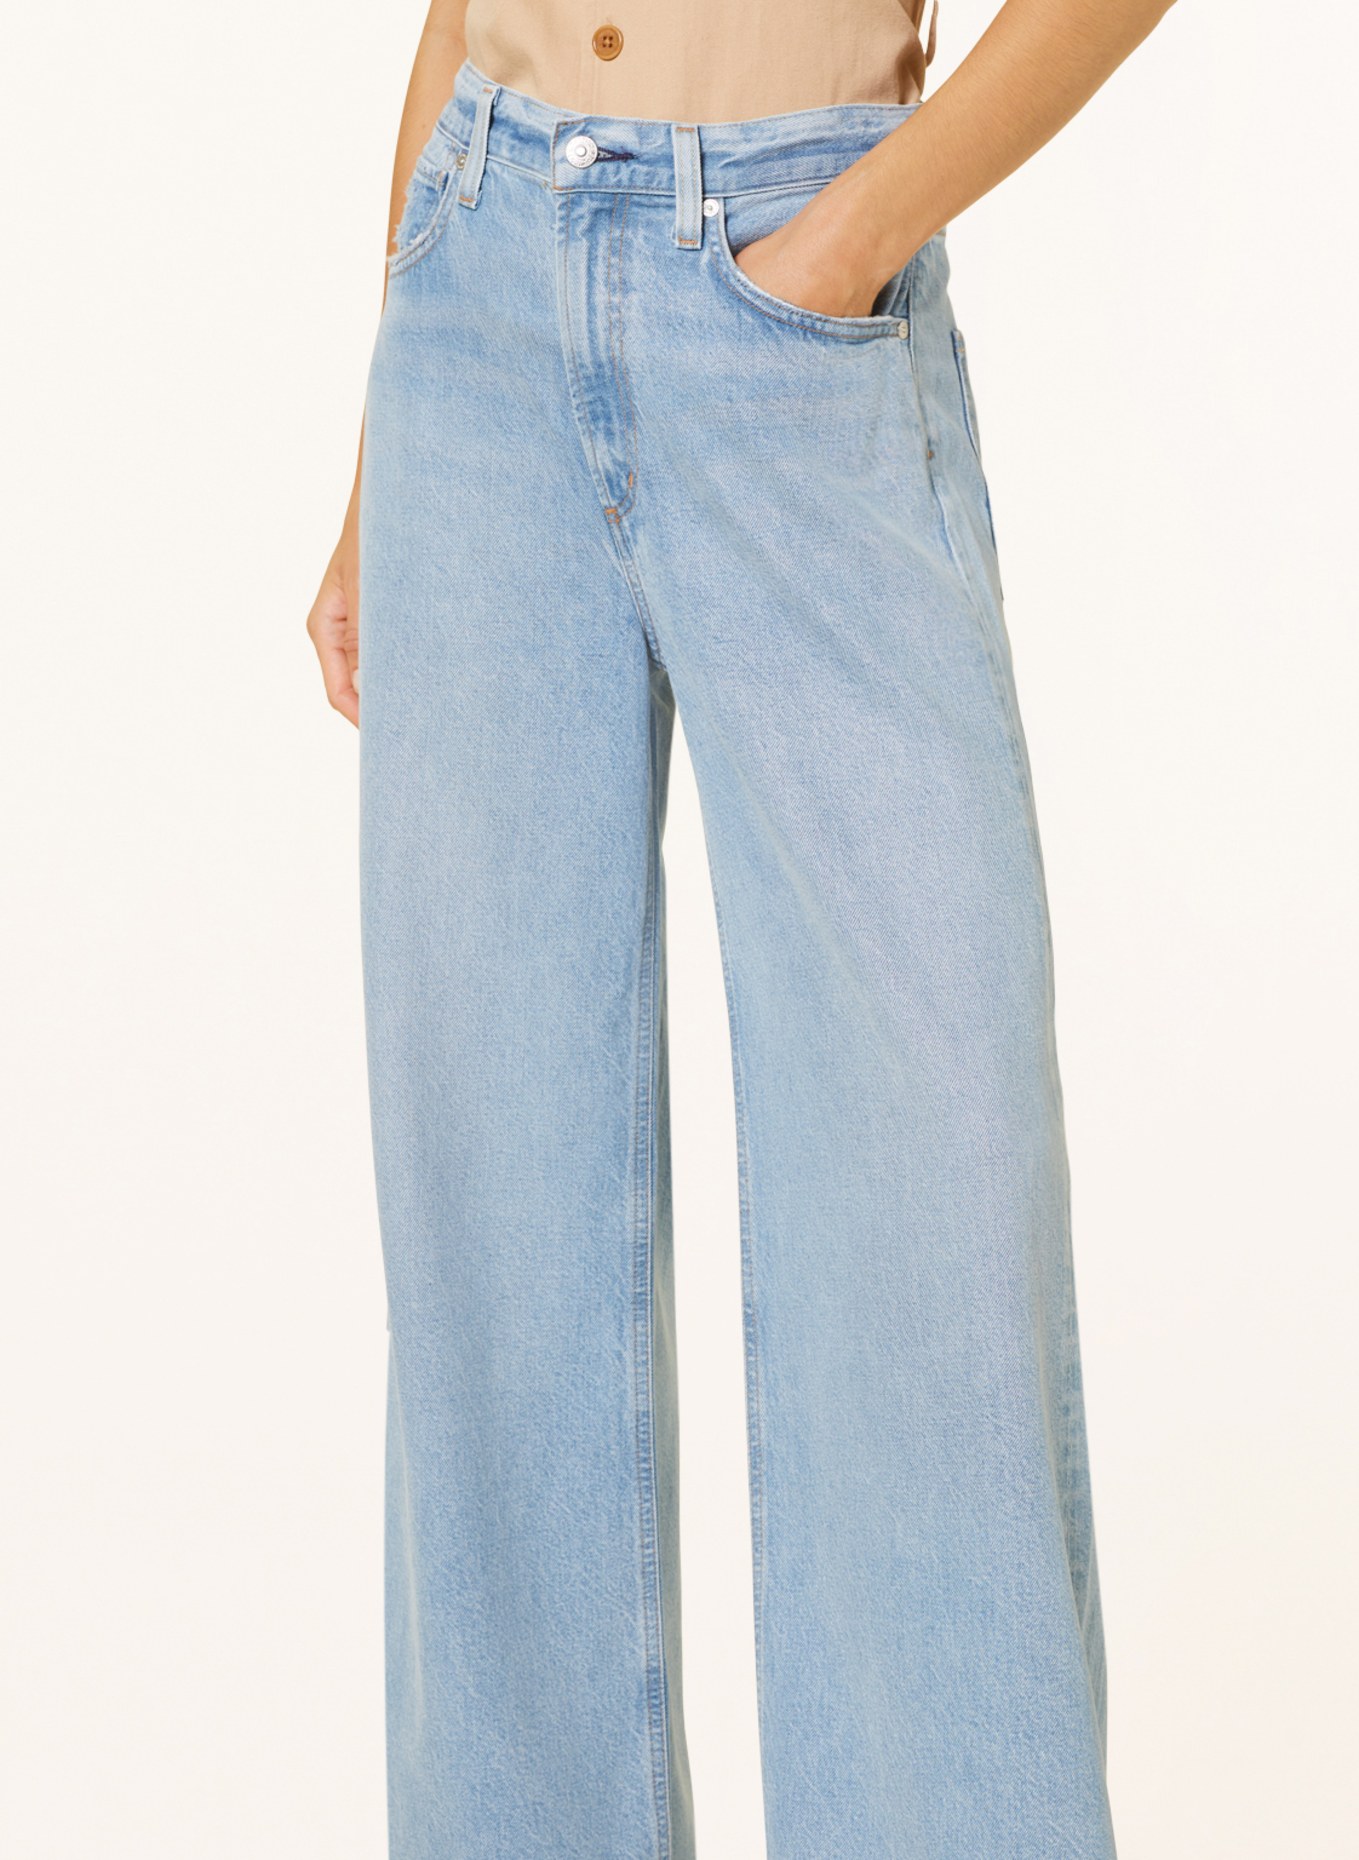 CITIZENS of HUMANITY Jeans PALOMA, Color: Alemayde lt ind (Image 5)